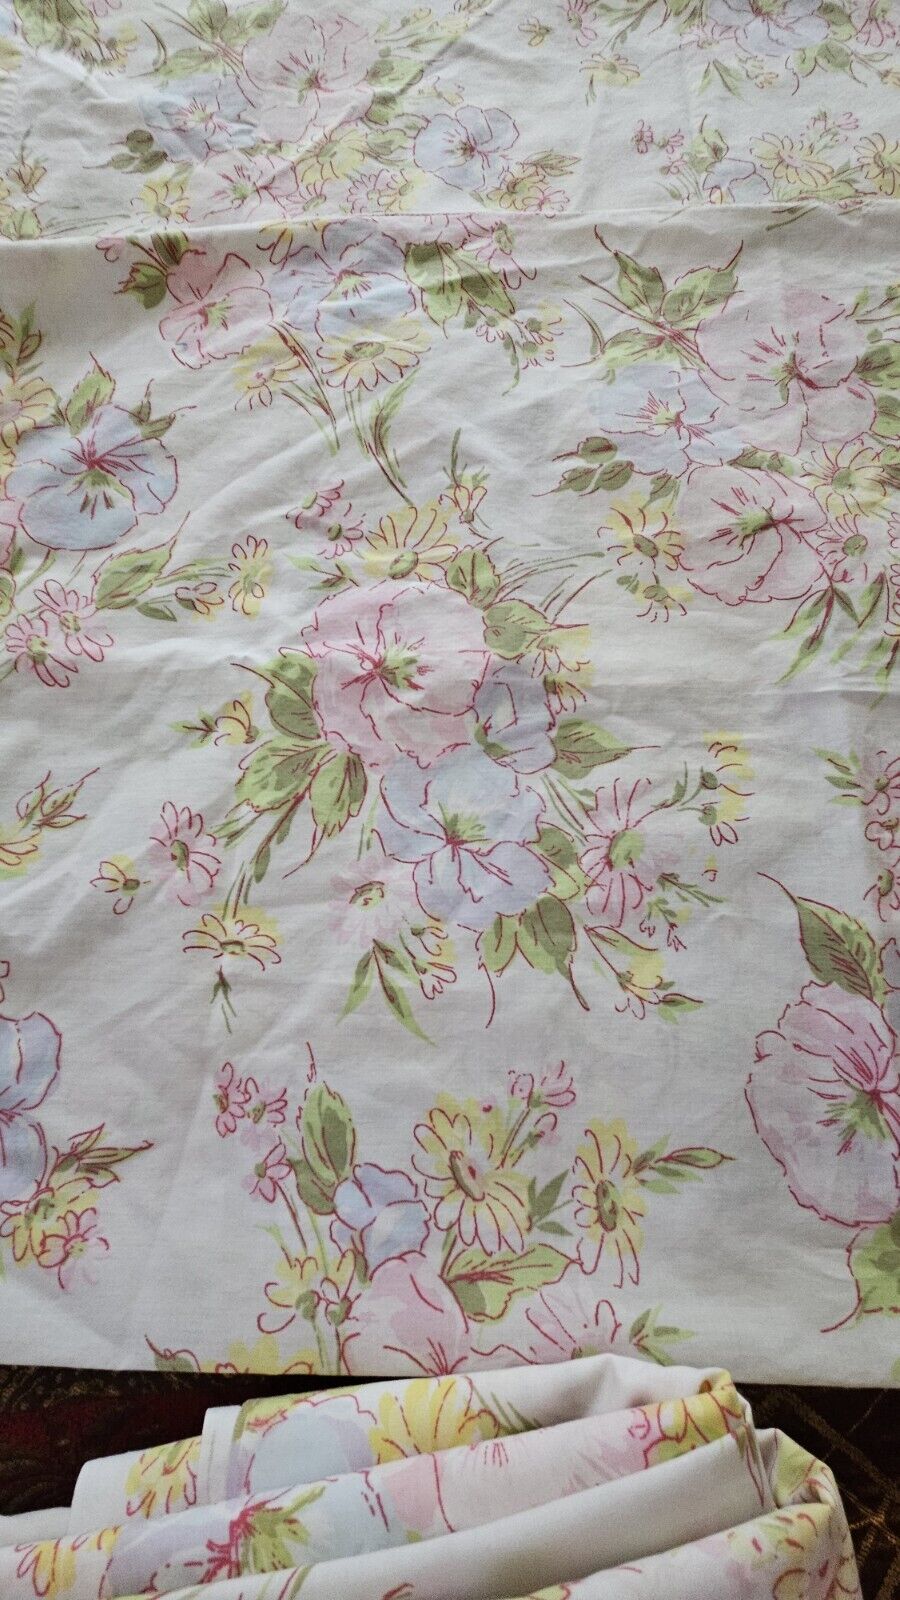 Vintage PEQUOT 2 Queen Flat Sheets & 2 King Pillowcases Floral No Iron Percale 